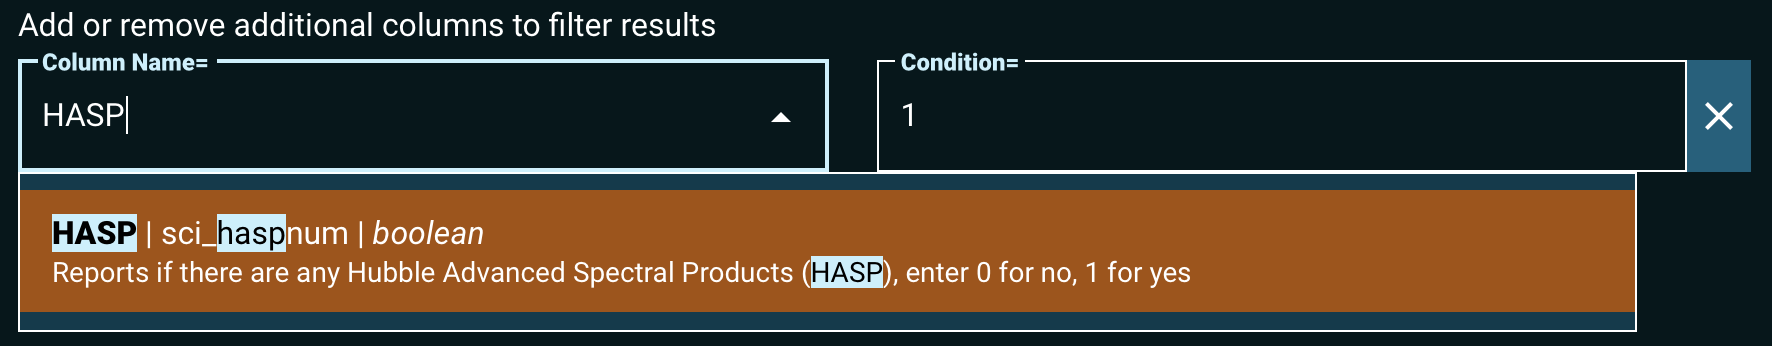 an additional condition for selecting HASP data, with the include value ('1') filled in